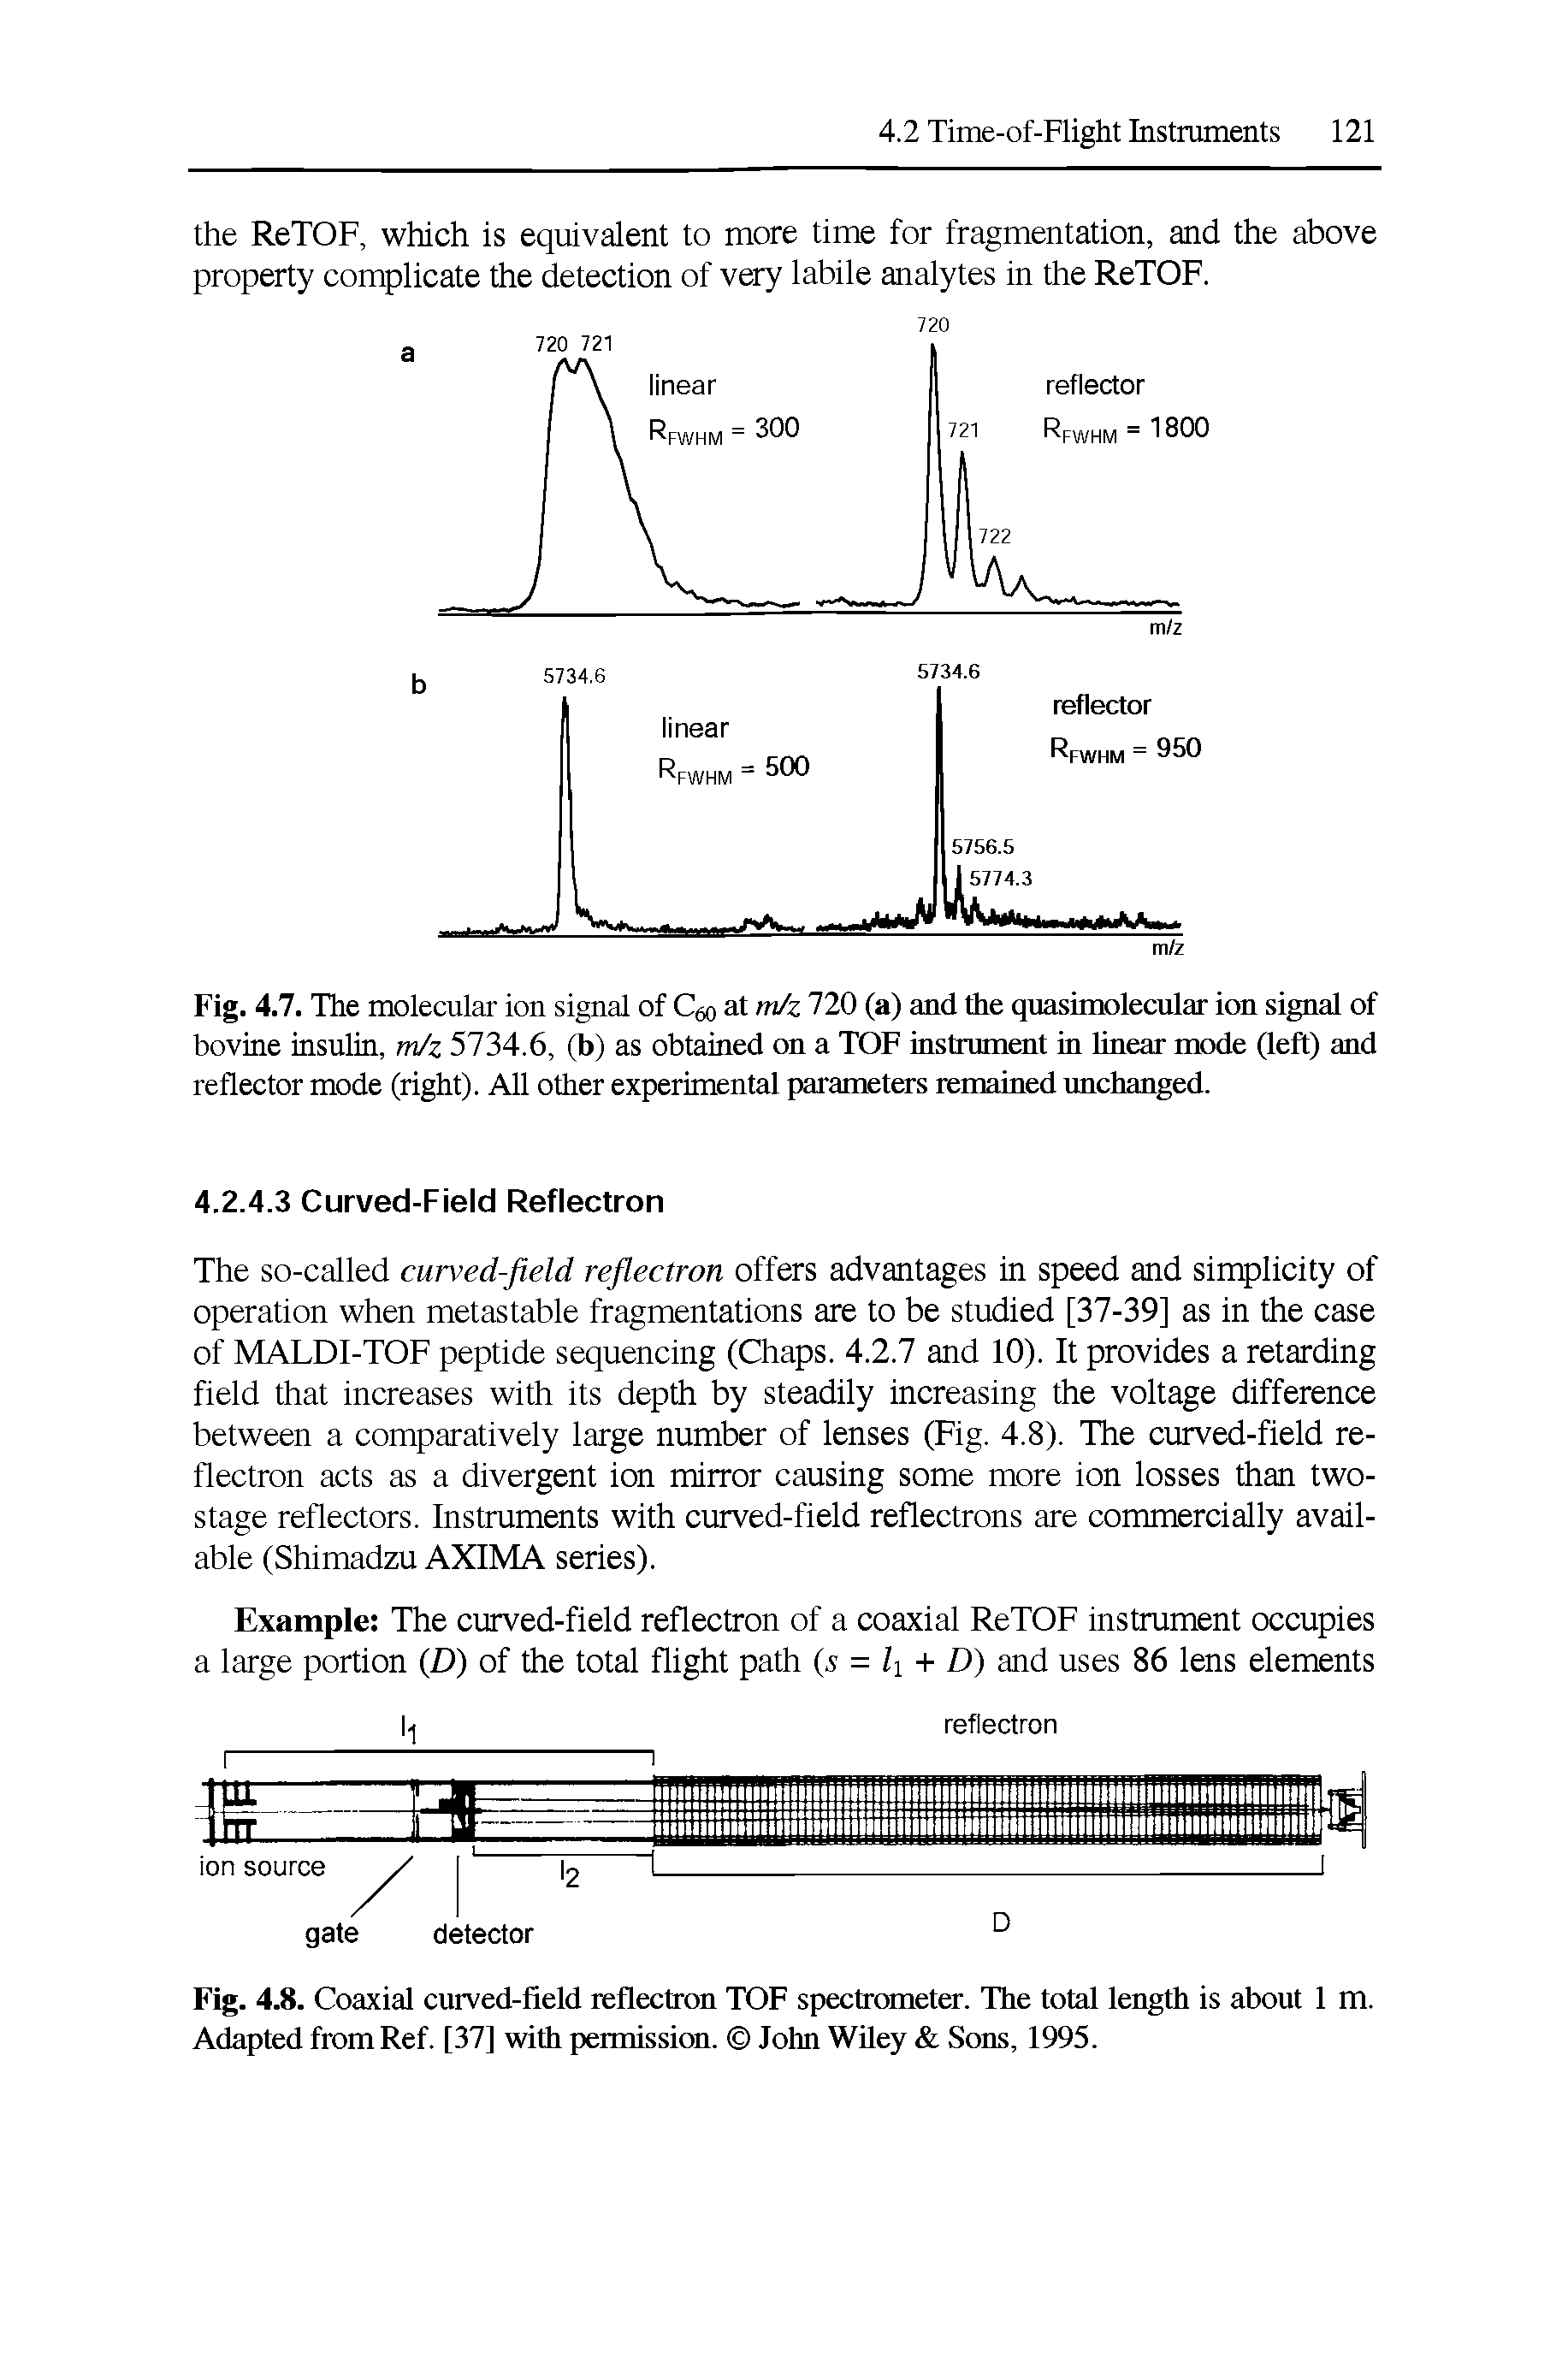 Fig. 4.8. Coaxial curved-field reflectron TOF spectrometer. The total length is about 1 m. Adapted from Ref. [37] with permission. John WUey Sons, 1995.